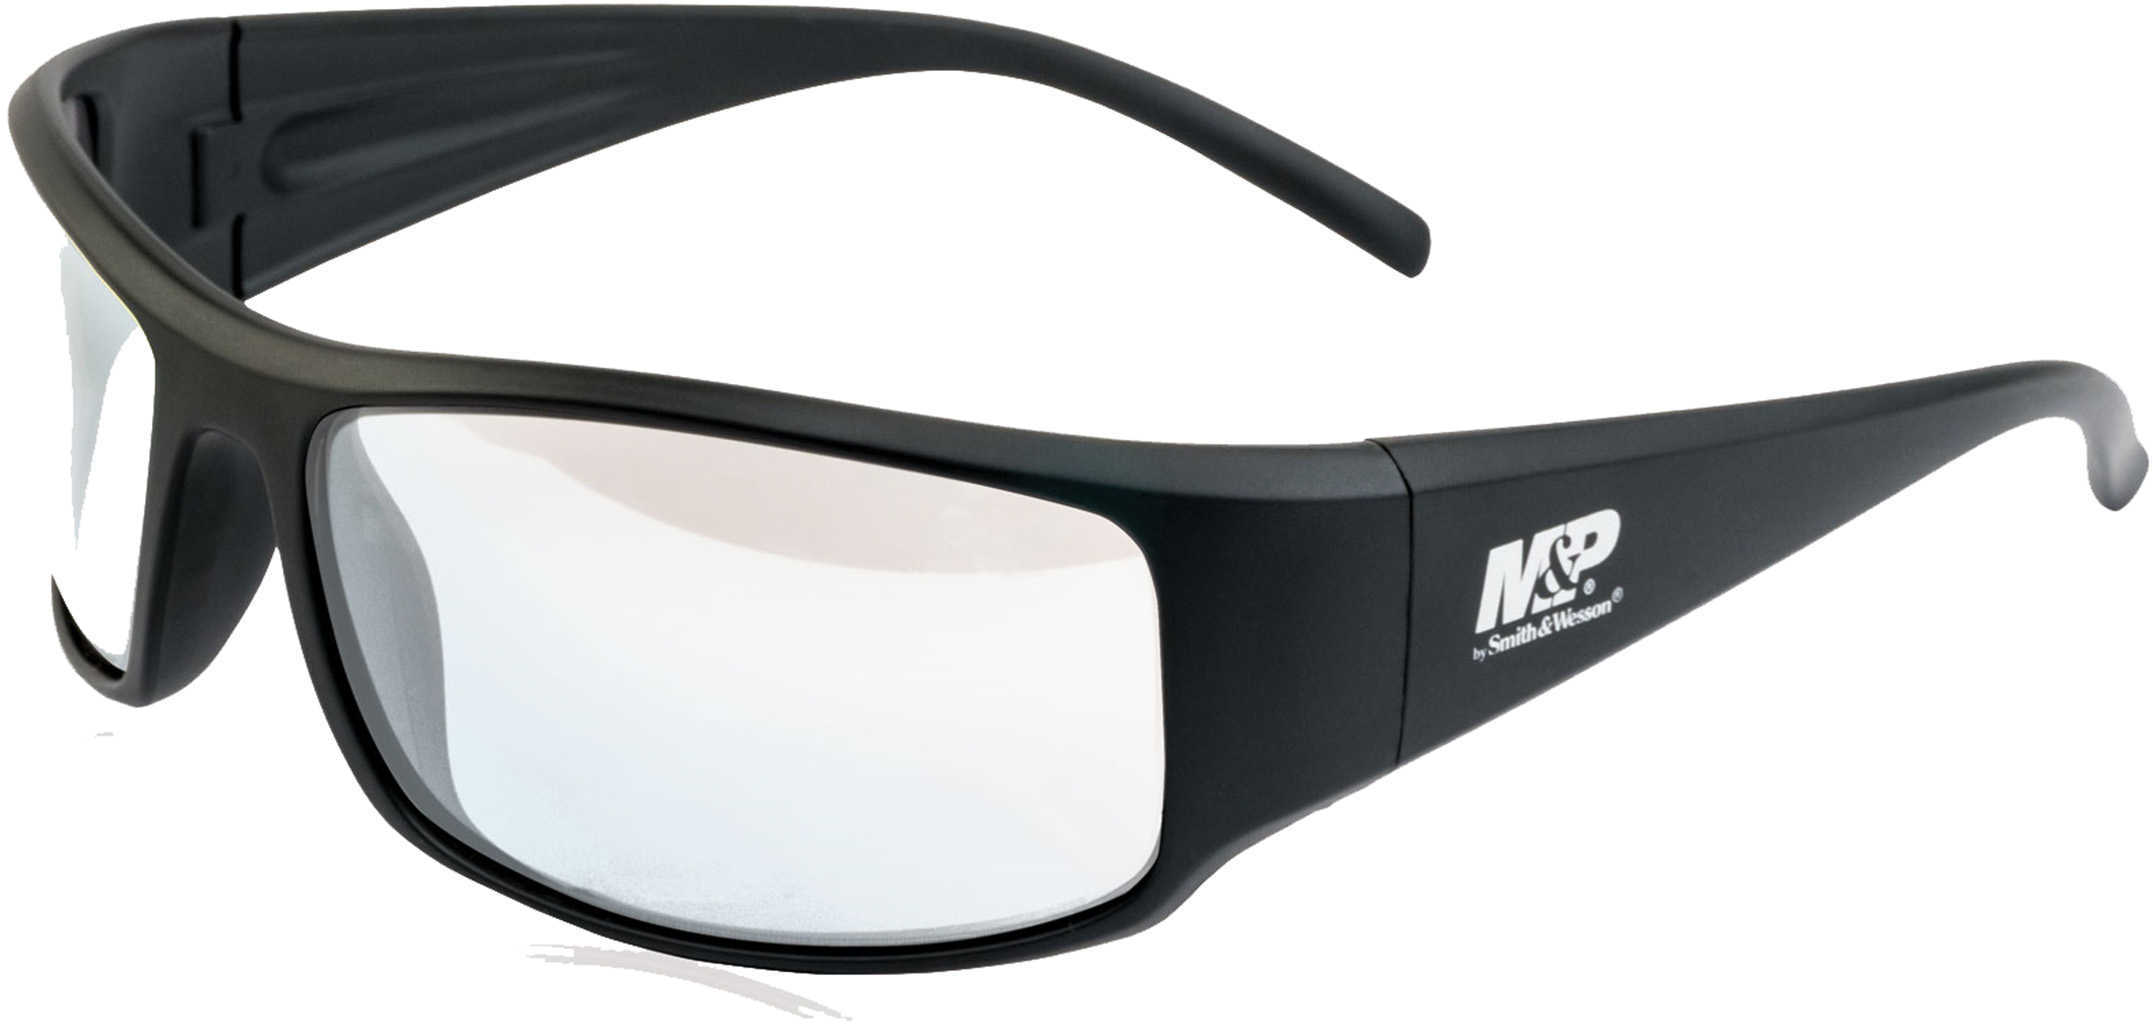 M&P Accessories 110168 Thunderbolt Shooting Glasses Clear Mirror Lens Black Polymer Full Size Frame Includes Case &